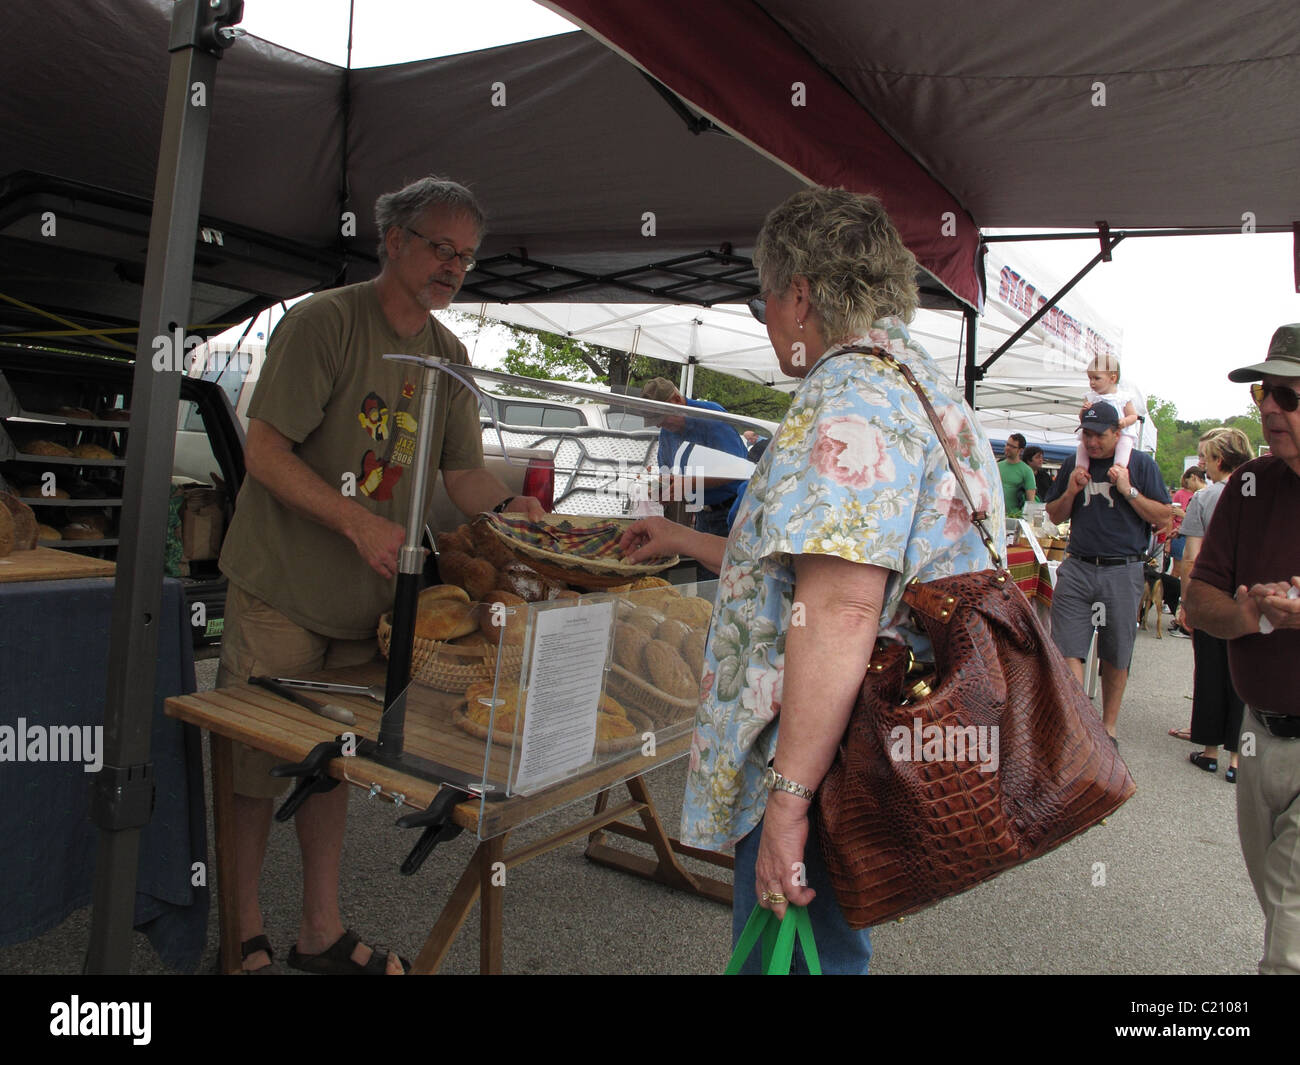 Woman trying a sample from a male vendor at a farmers market in Austin, Texas. Stock Photo